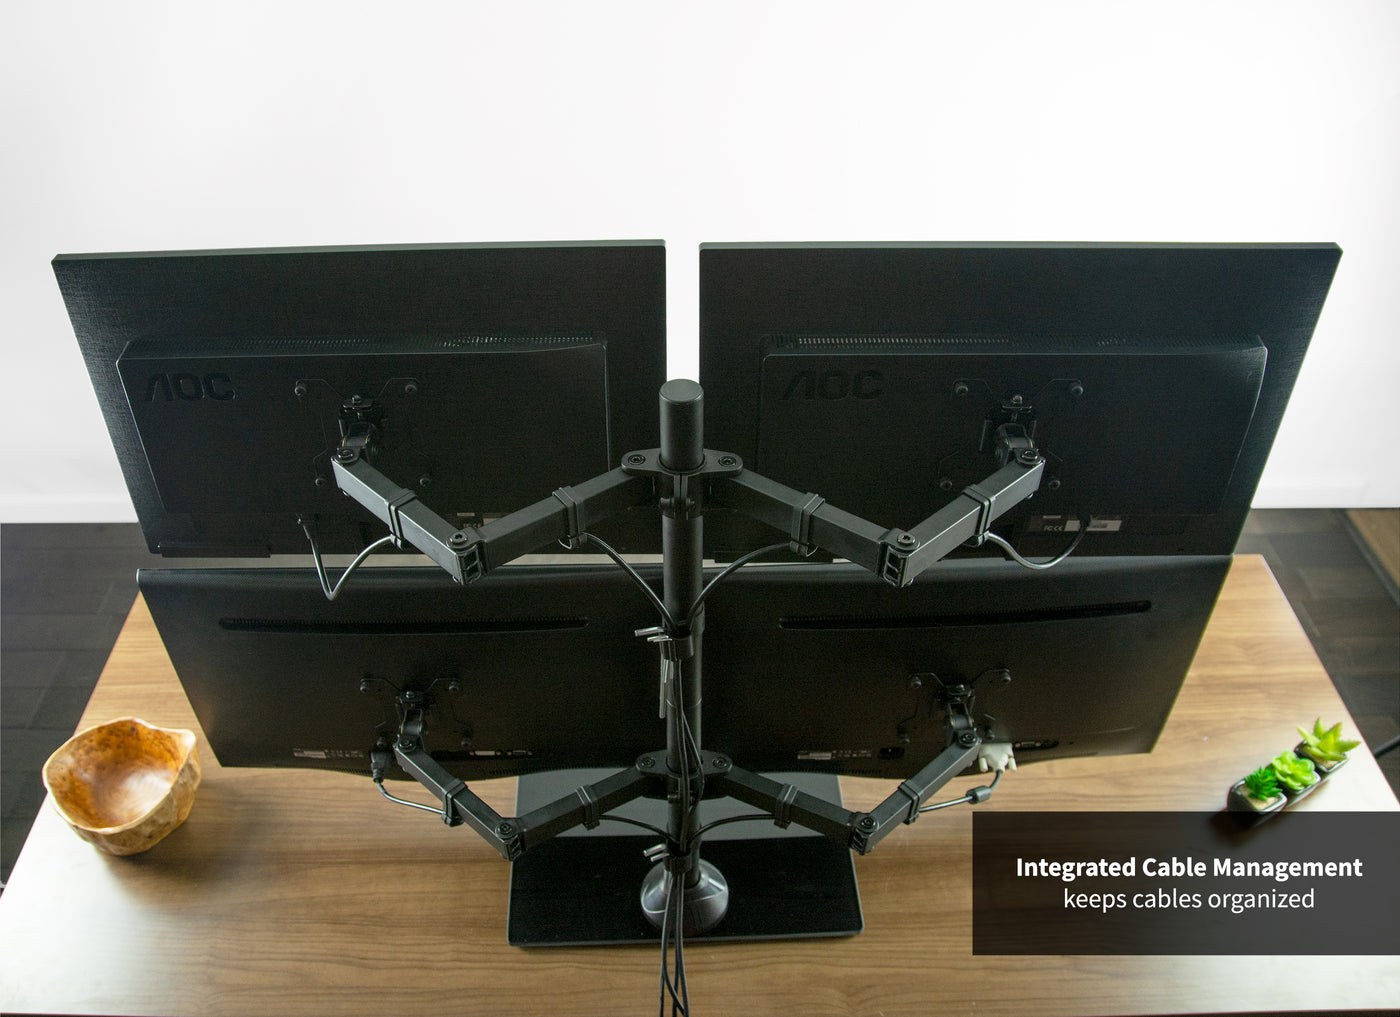 Sturdy height adjustable quad monitor desk stand with integrated cable management.